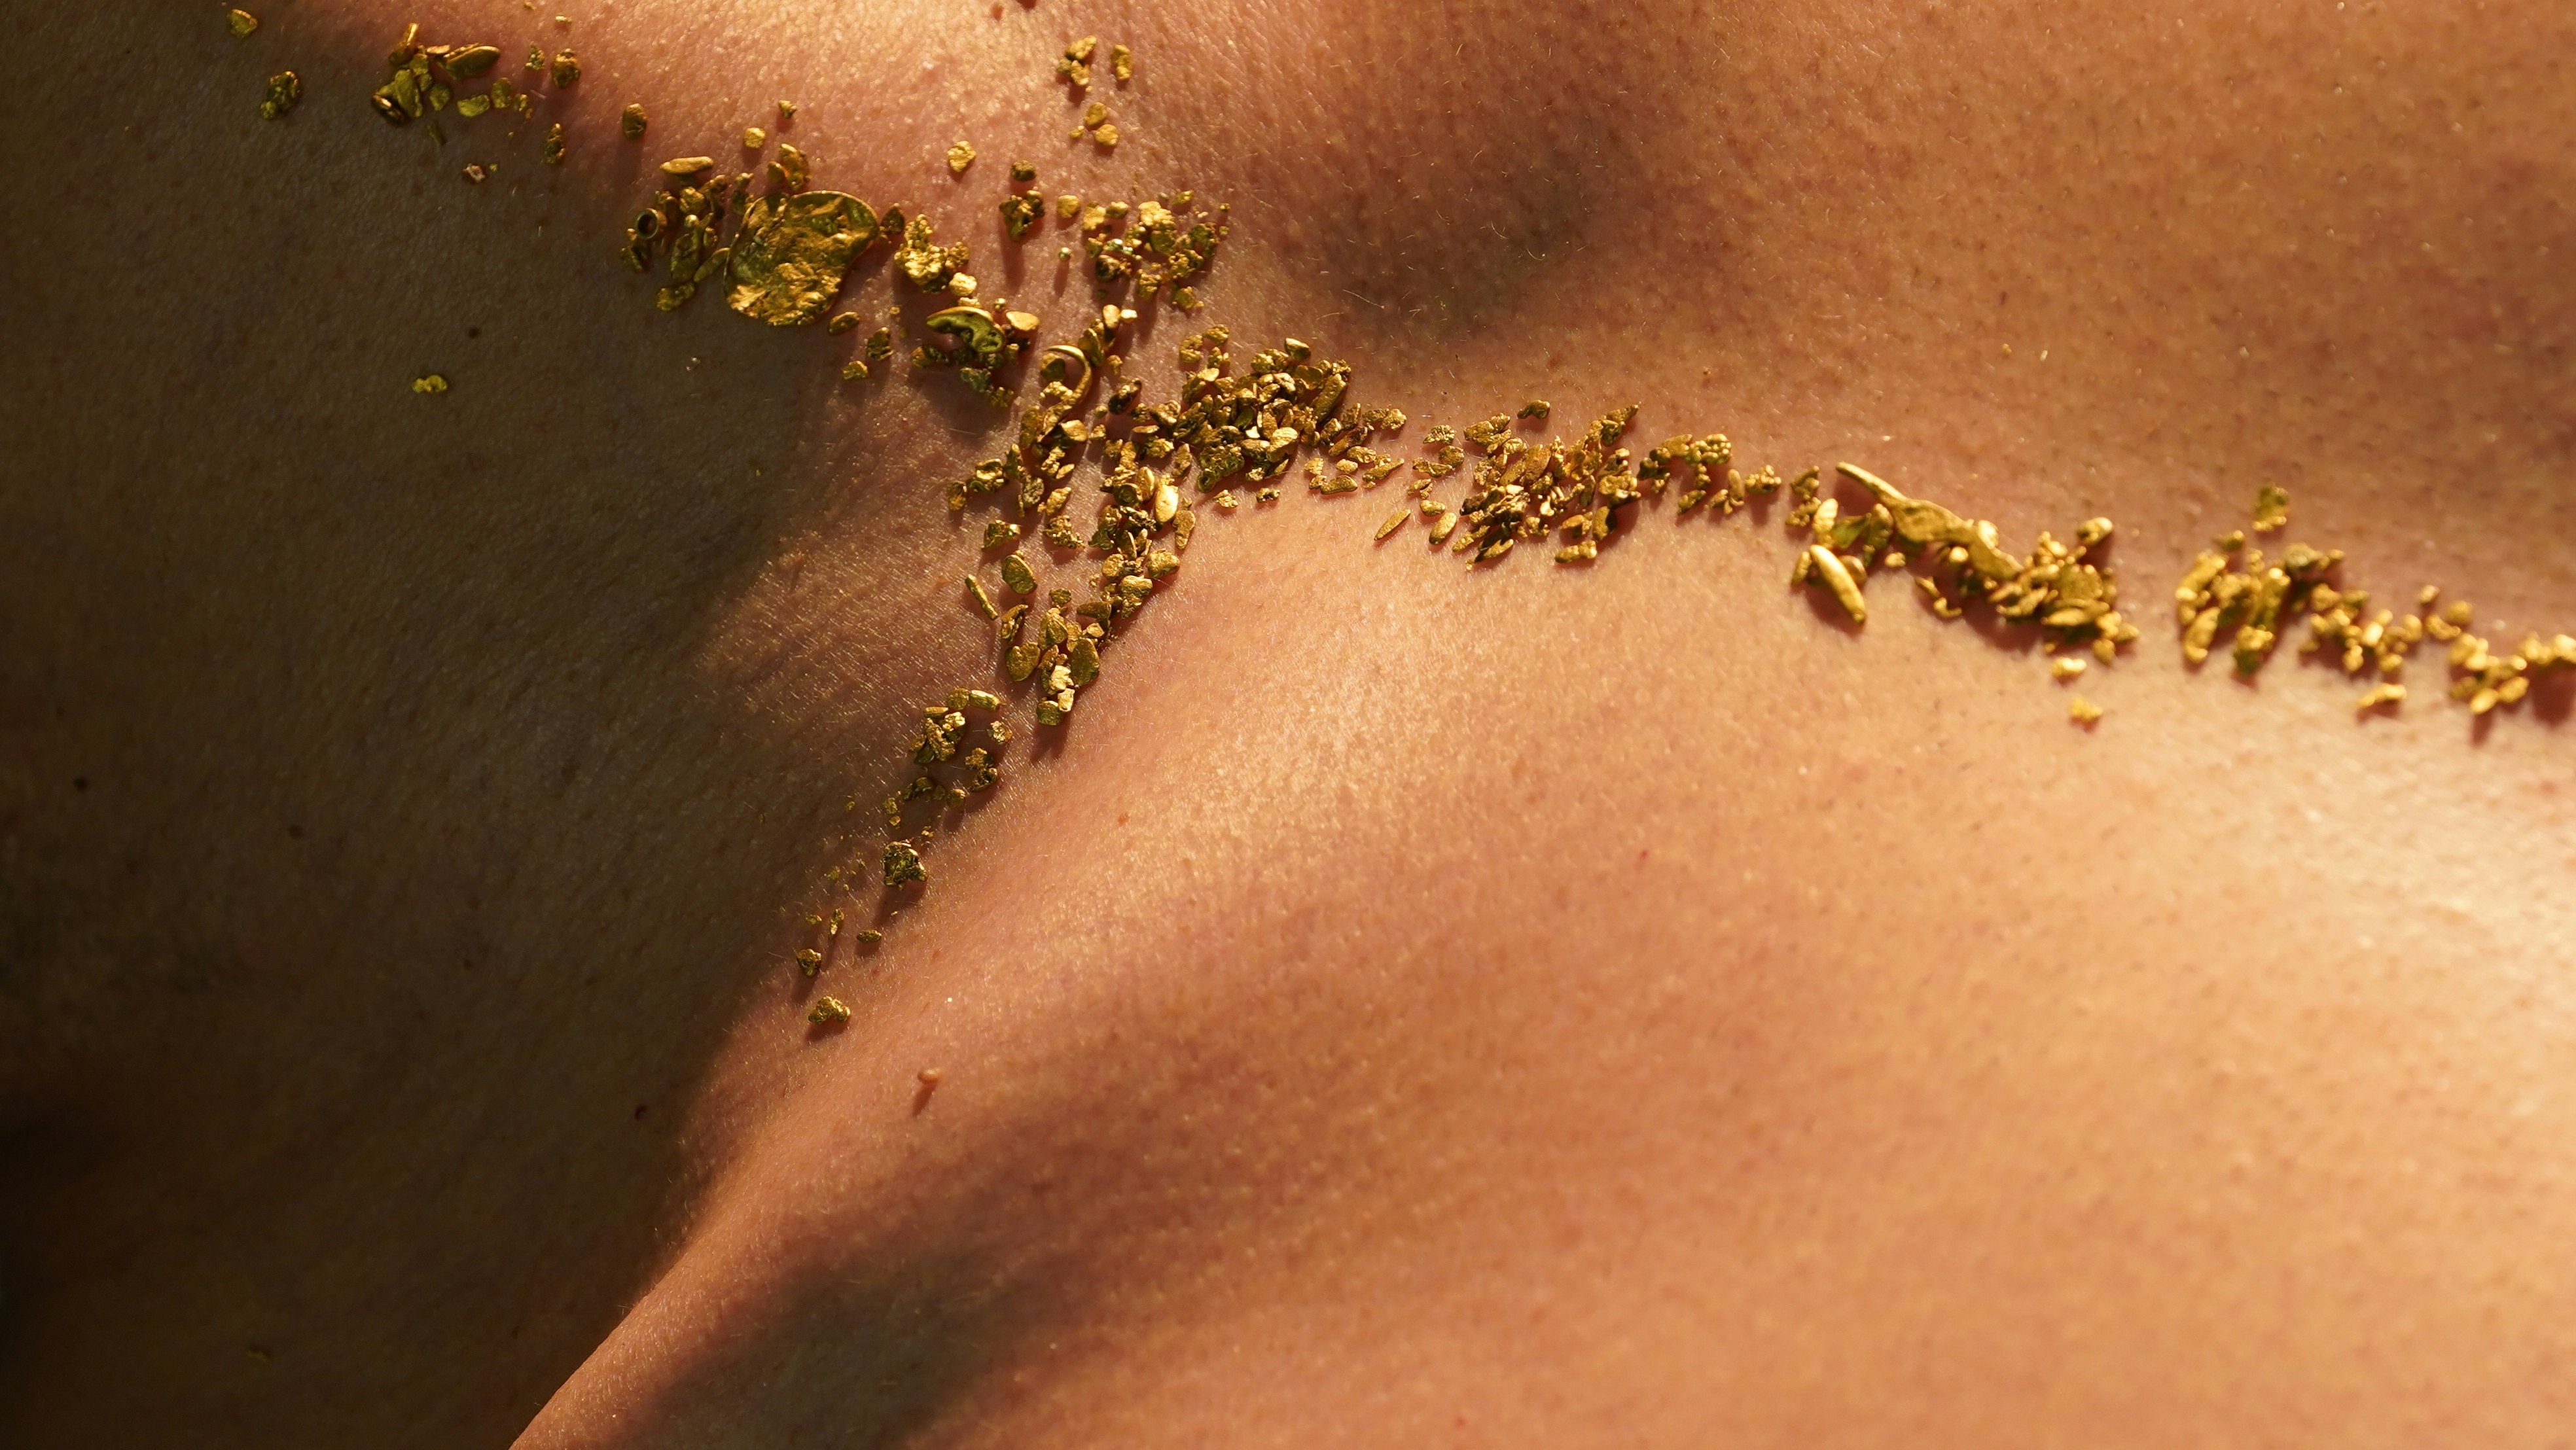 A color photograph of human clavicle sprinkled with gold pieces.